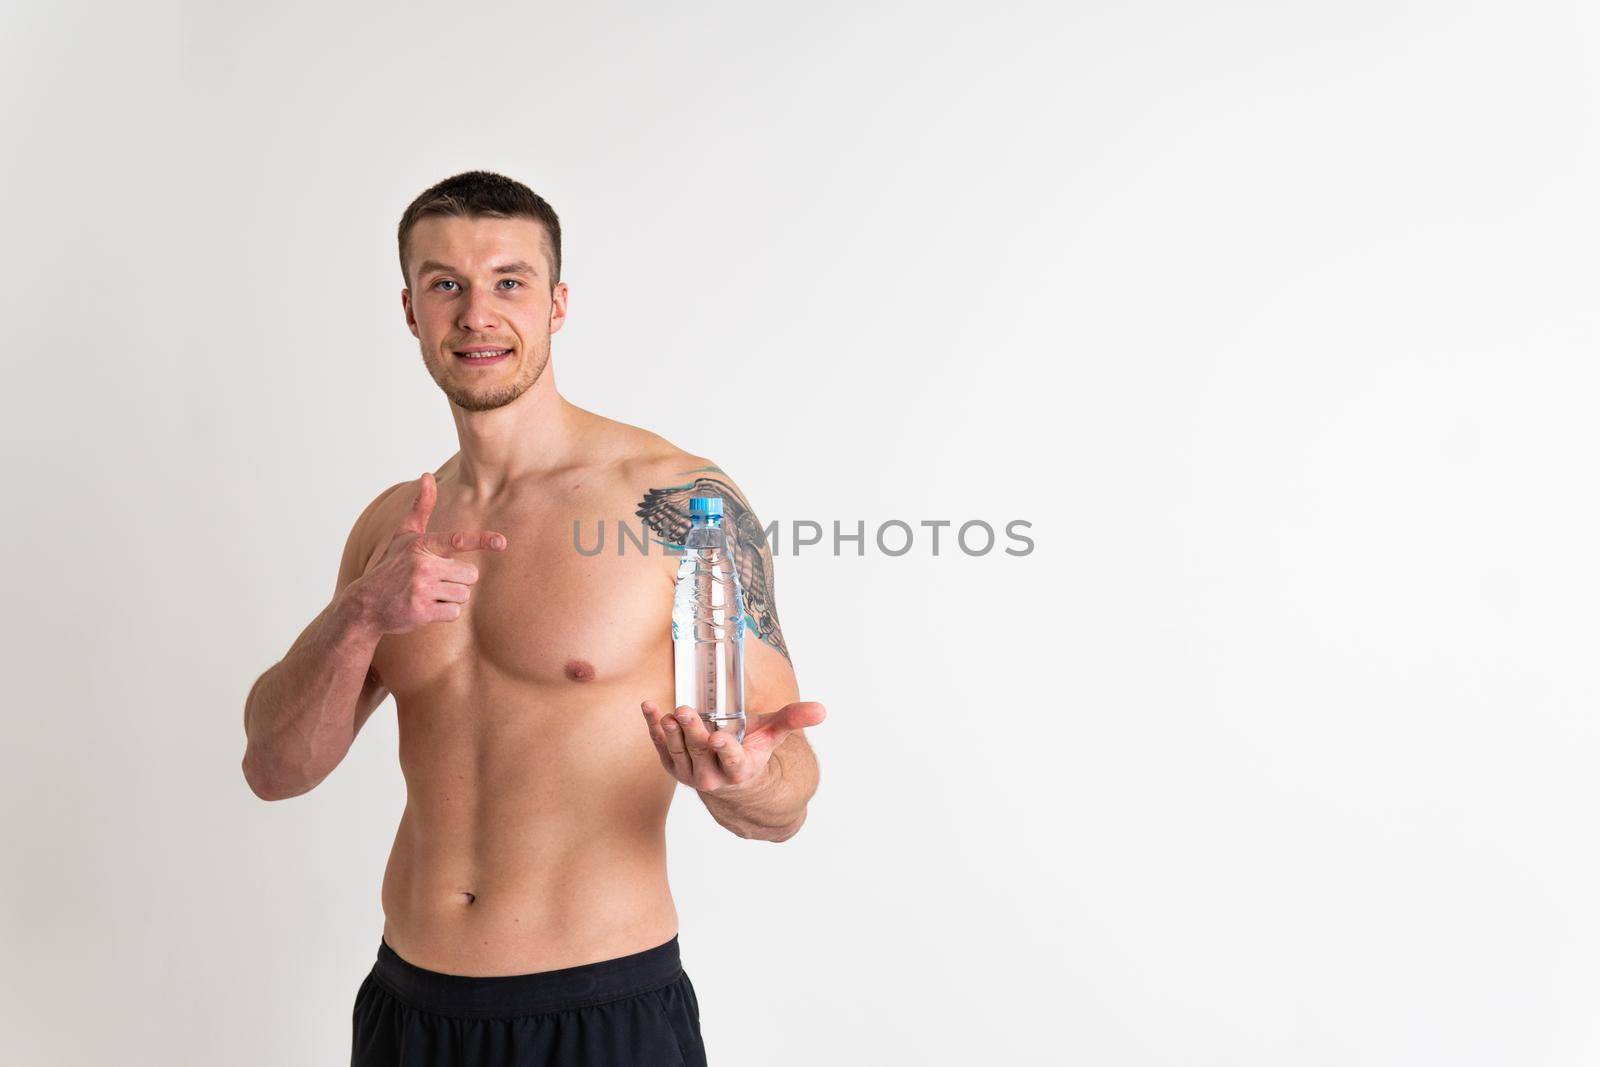 Male drink-water fitness is pumped with a towel on a white background isolated fitness workout body, exercise gym man break cardio. Bodybuilding active, powerful one muscle